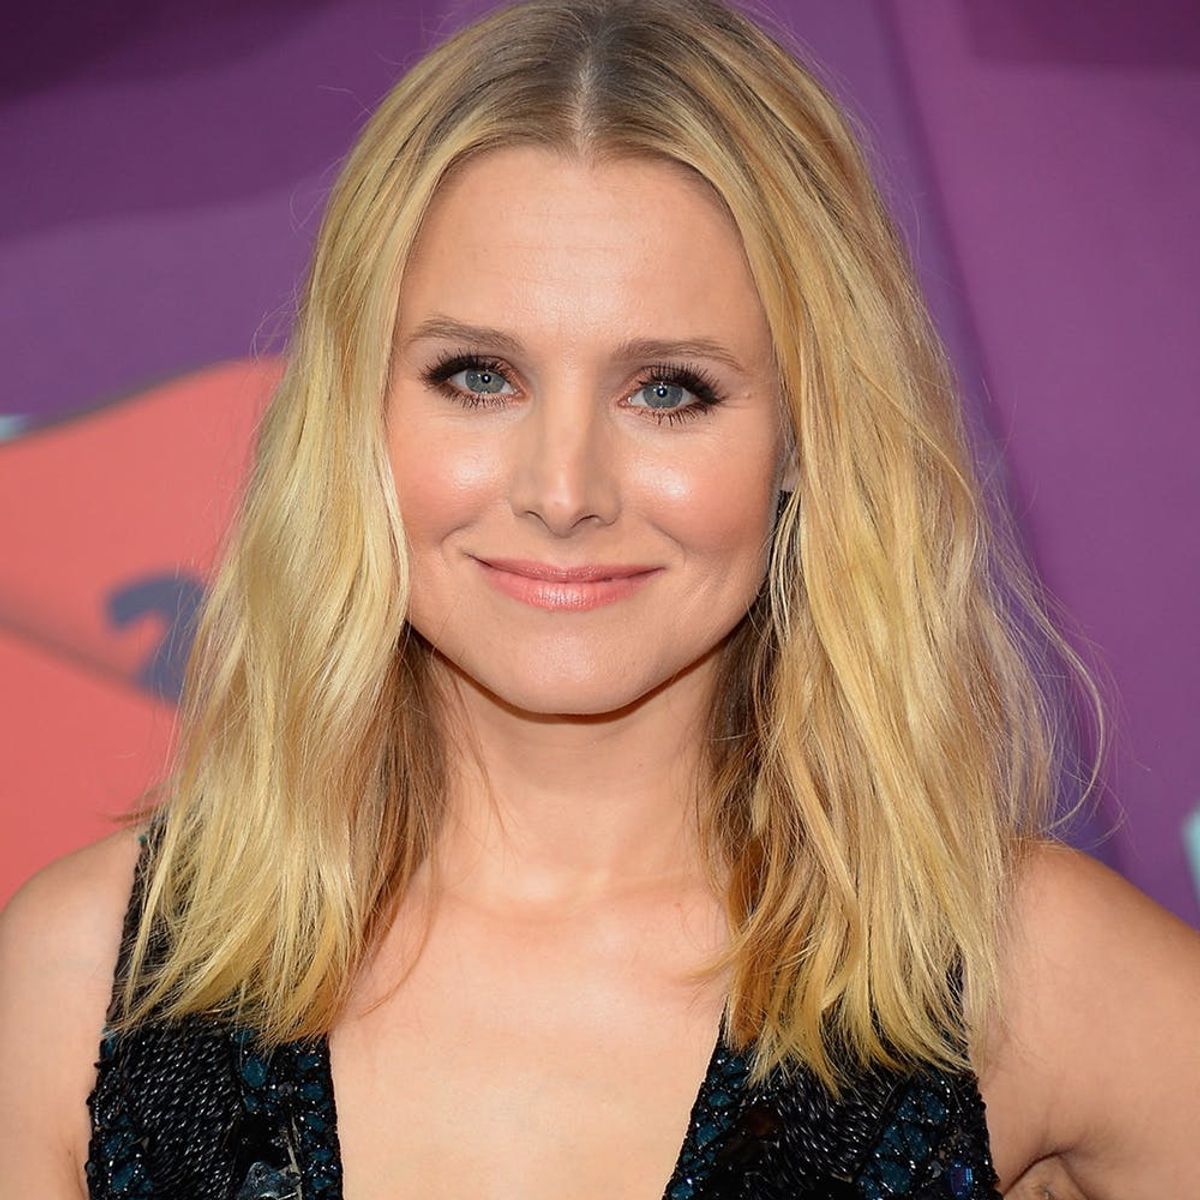 Kristen Bell Just Got an Instagram Account and We’re Already Totally Obsessed